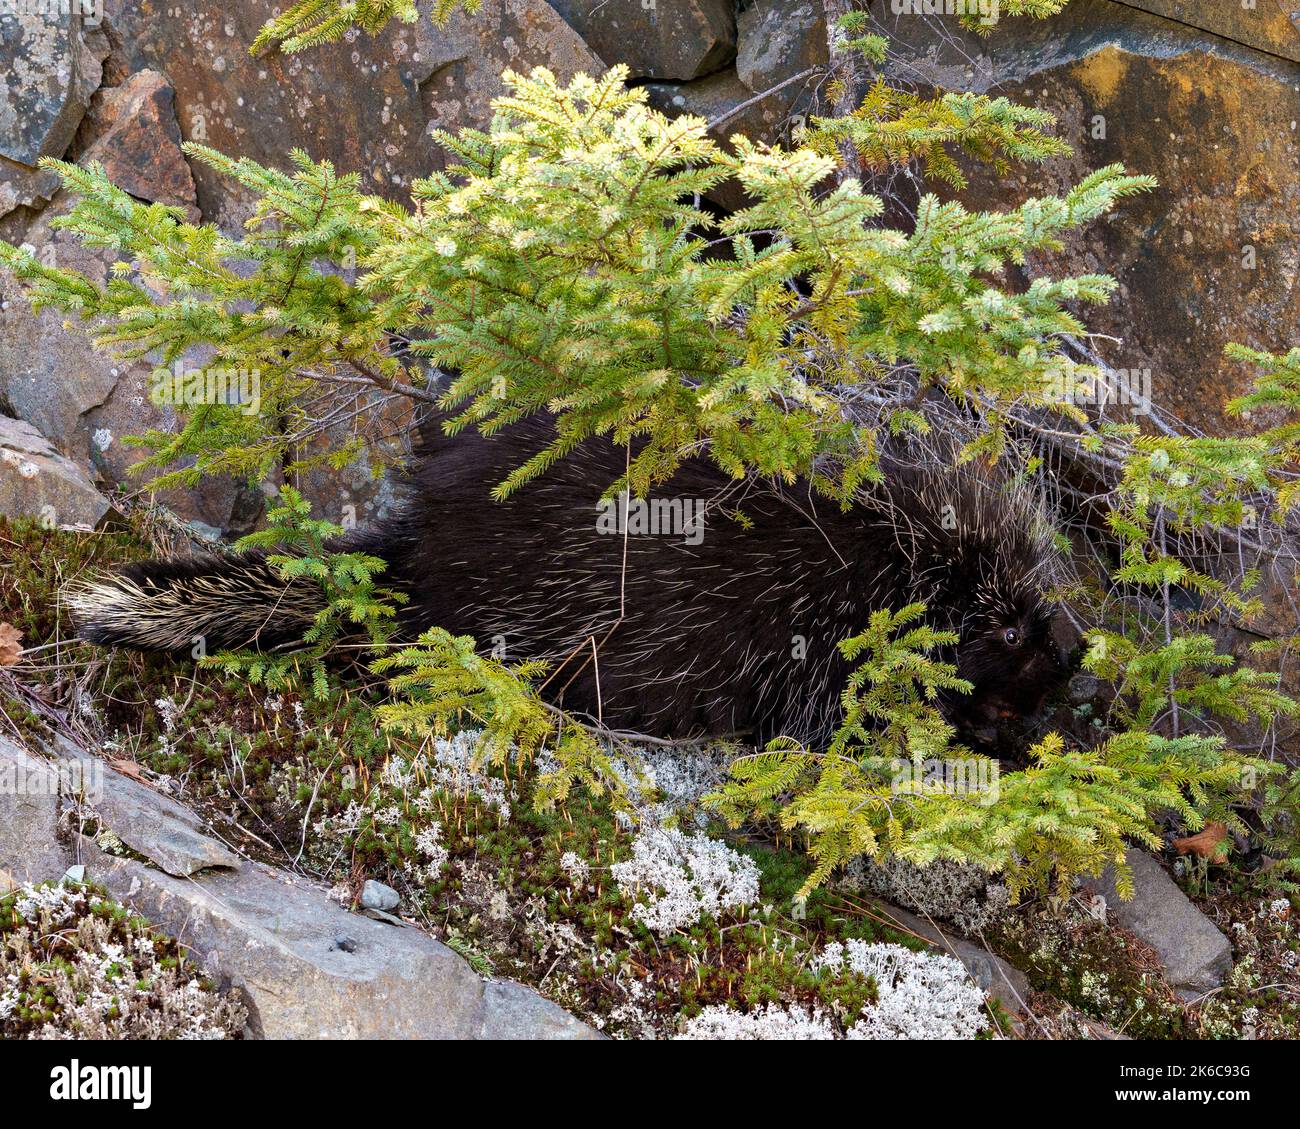 Porcupine close-up profile view in the forest with a big rock and moss hiding under a coniferous tree in its surrounding and habitat environment. Stock Photo